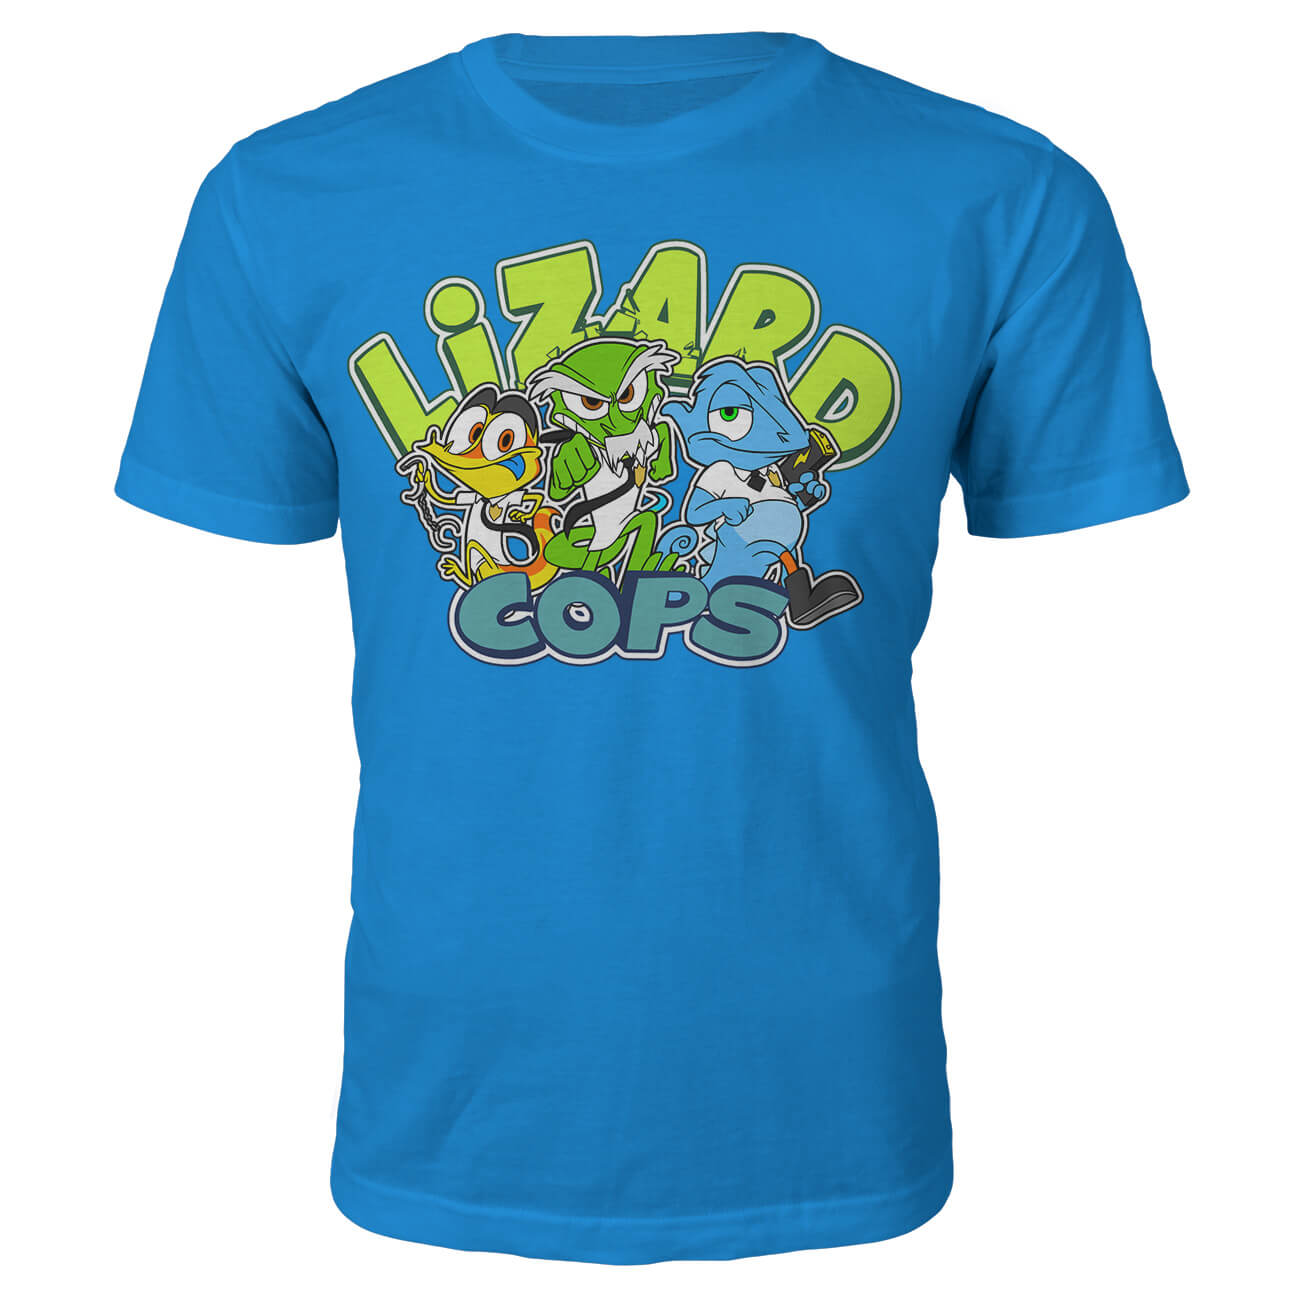 Click to view product details and reviews for Lizard Cops T Shirt Kids L 9 11 Years Blue.